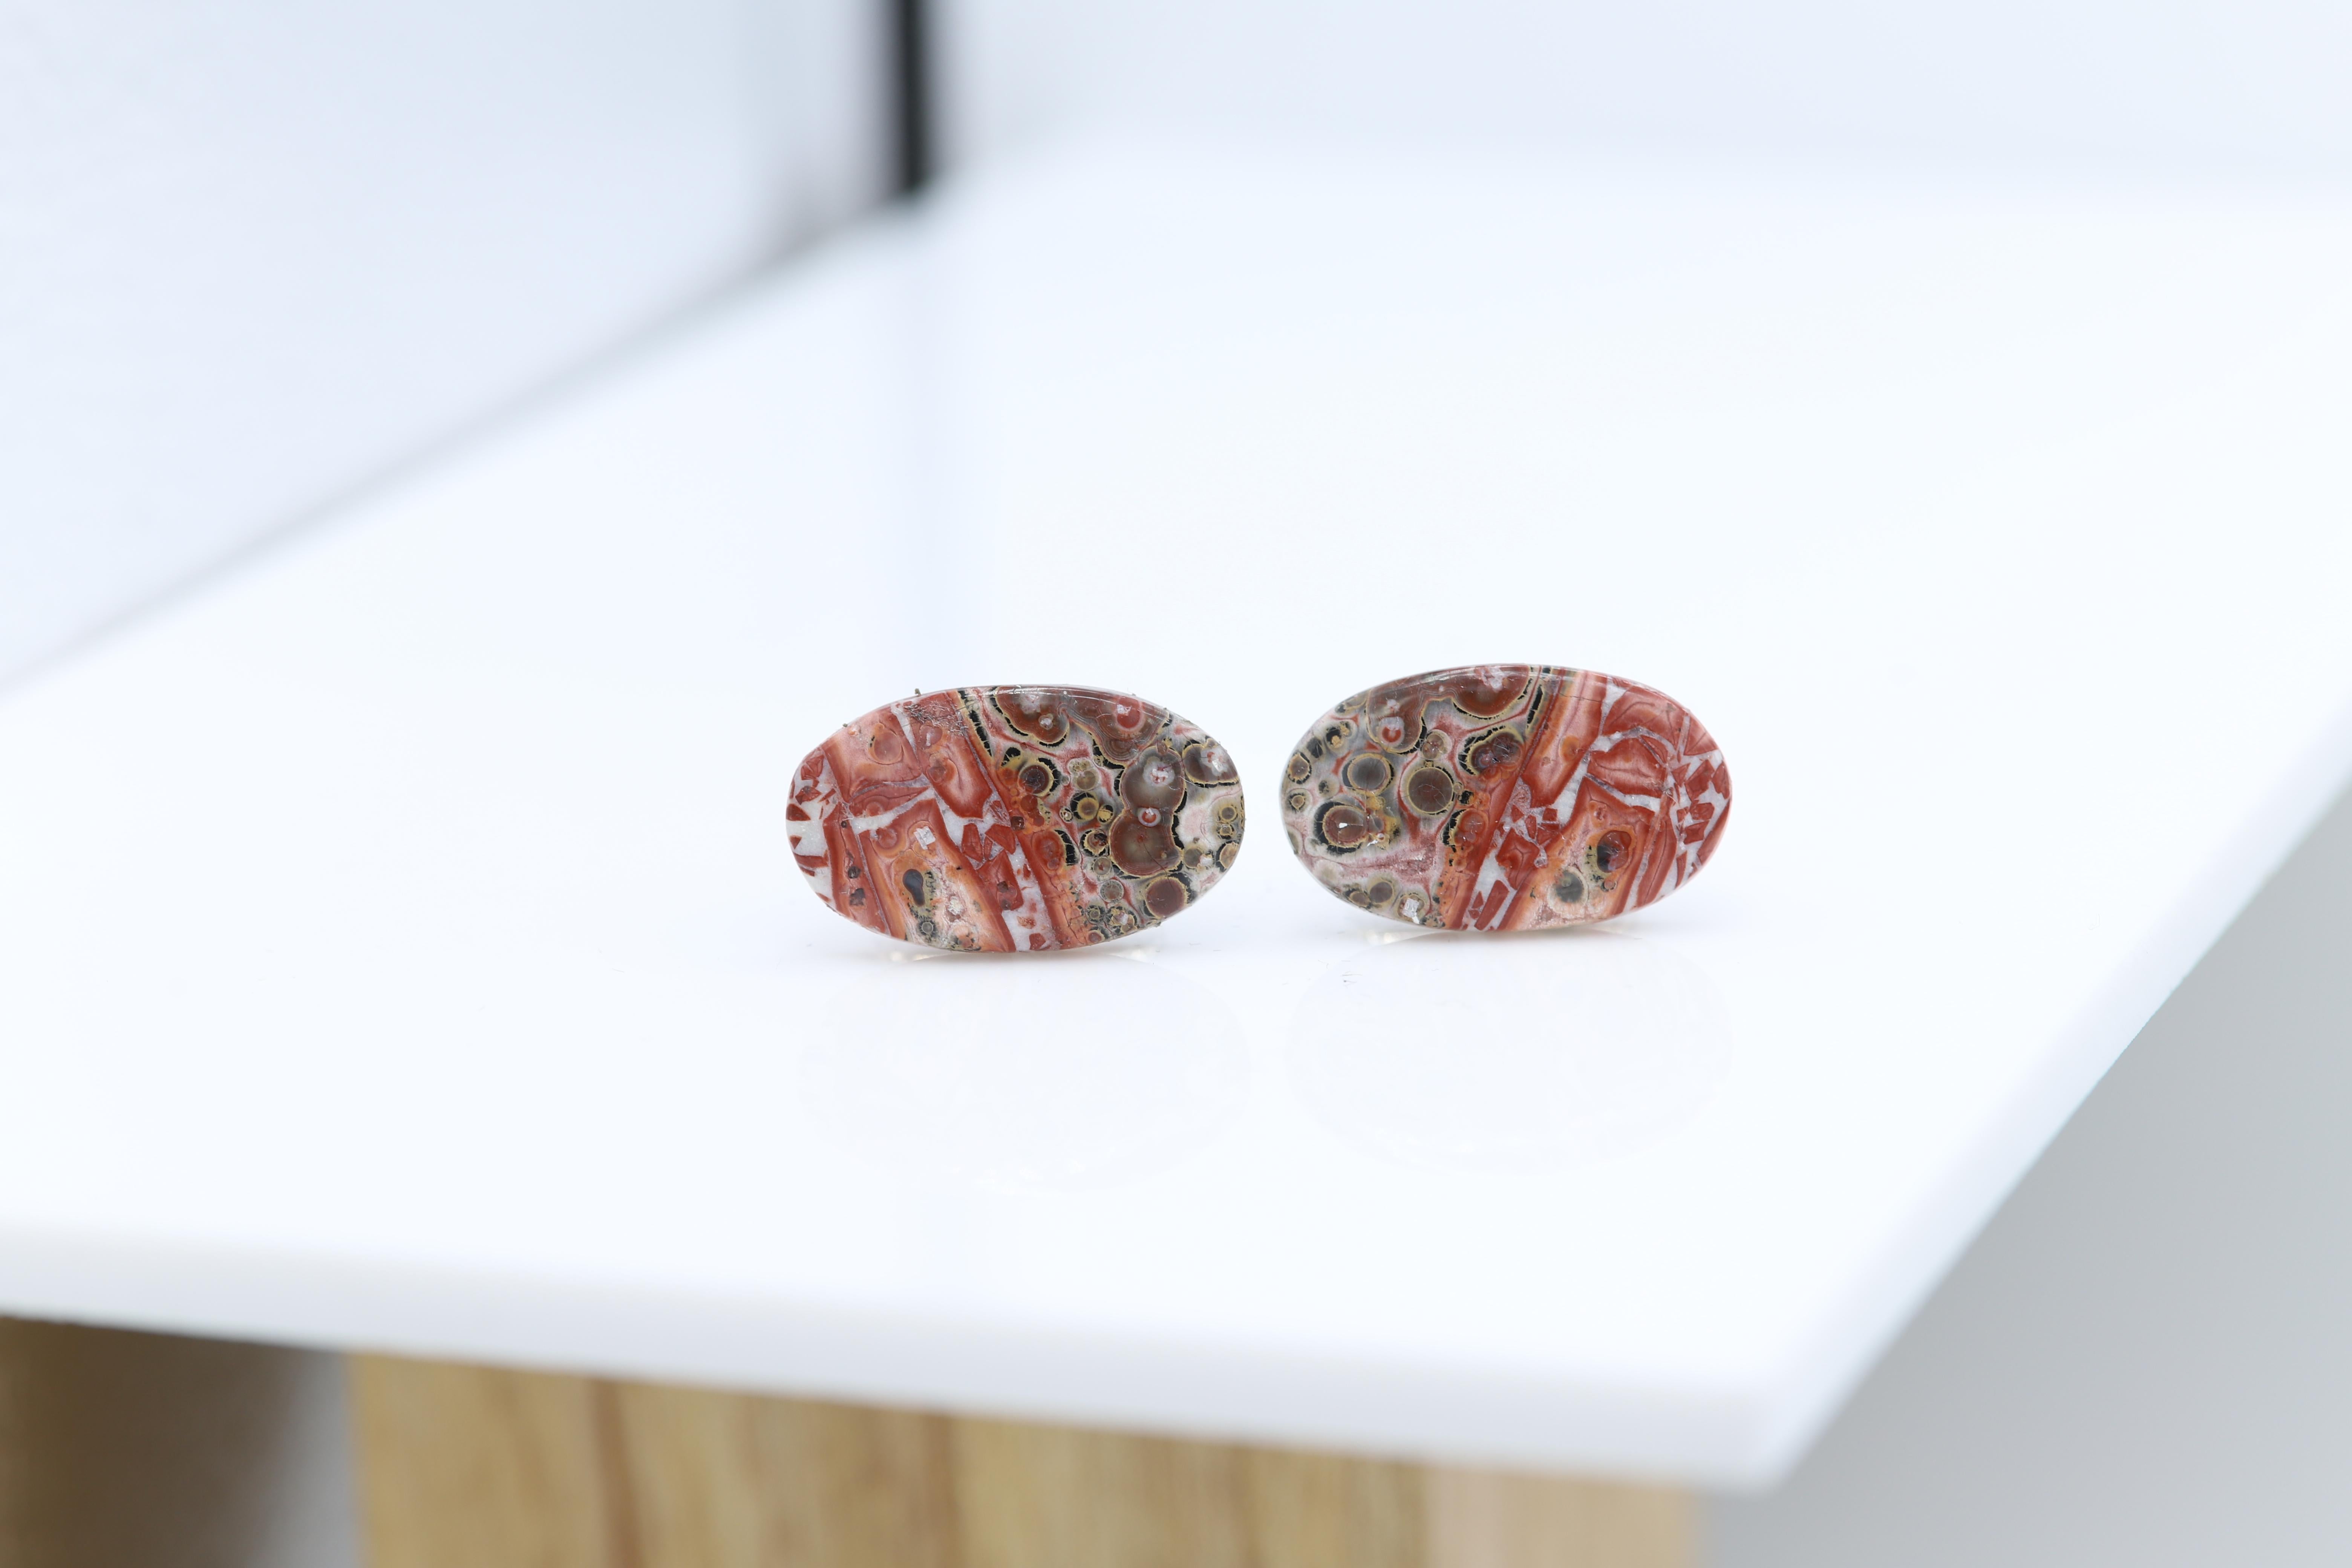 New unique men's cufflink - natural stone.
Stone name: Leopard skin Jasper
Approx. size 27 X 15 MM
Beautiful natural texture.
Imperfection may exist due to natural formations.
Back part metal is a general alloy metal - none precious
Gift Box